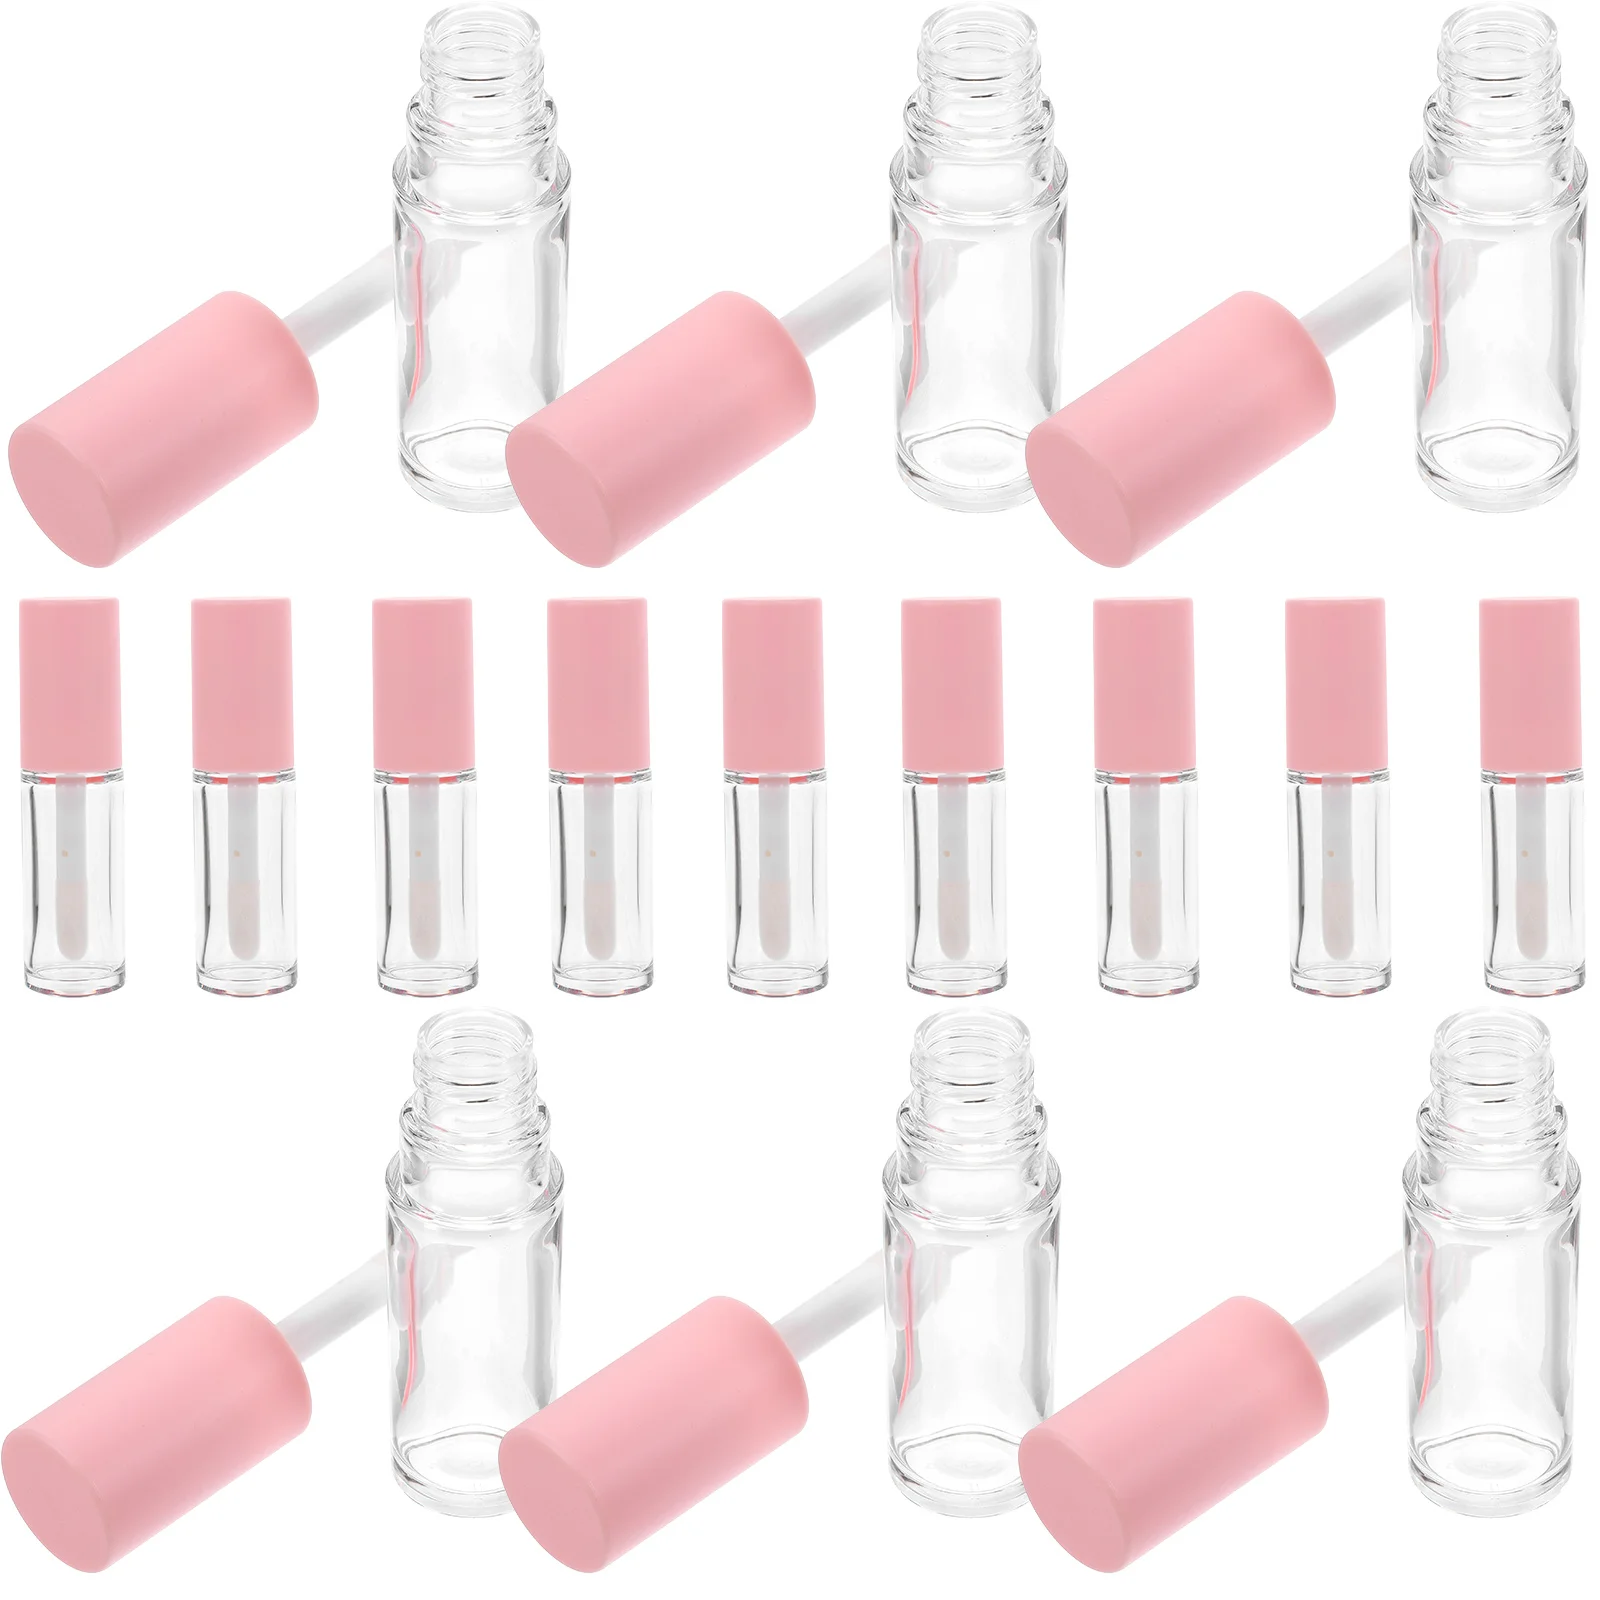 

15 Pcs Clear Lip Gloss Tube Wand Empty Refillable Balm Container Containers Tubes